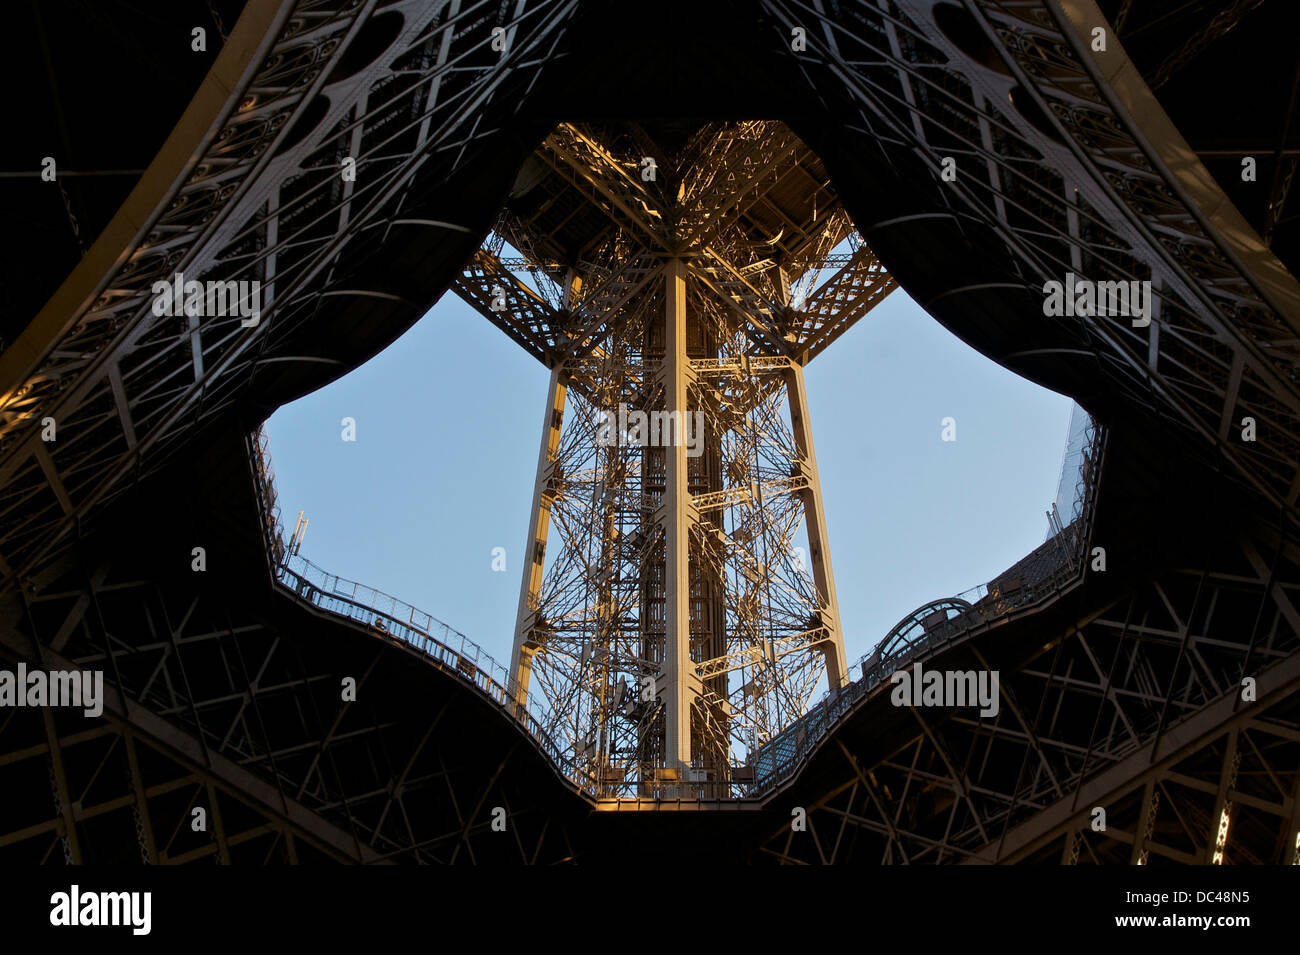 Looking up, through the center, the south pillar of the Eiffel Tower, Paris. Stock Photo